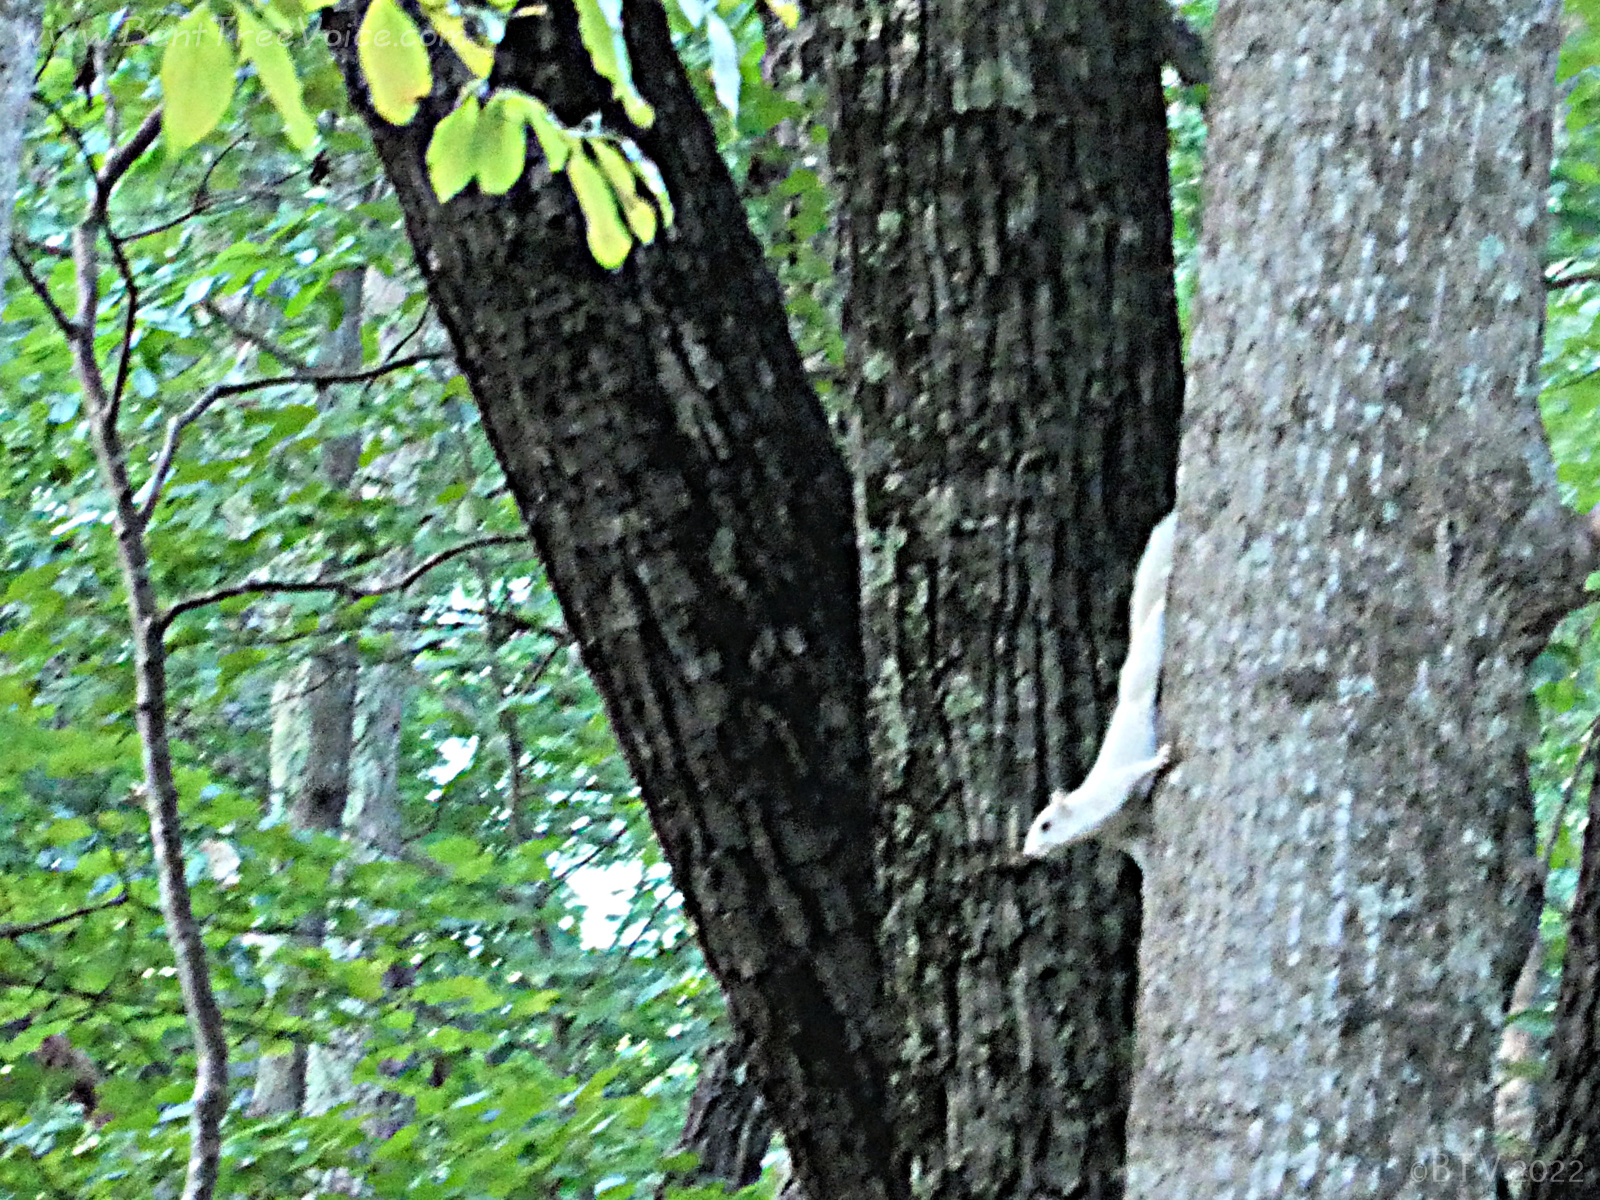 September 6, 2022 - White Squirrel in Bent Tree